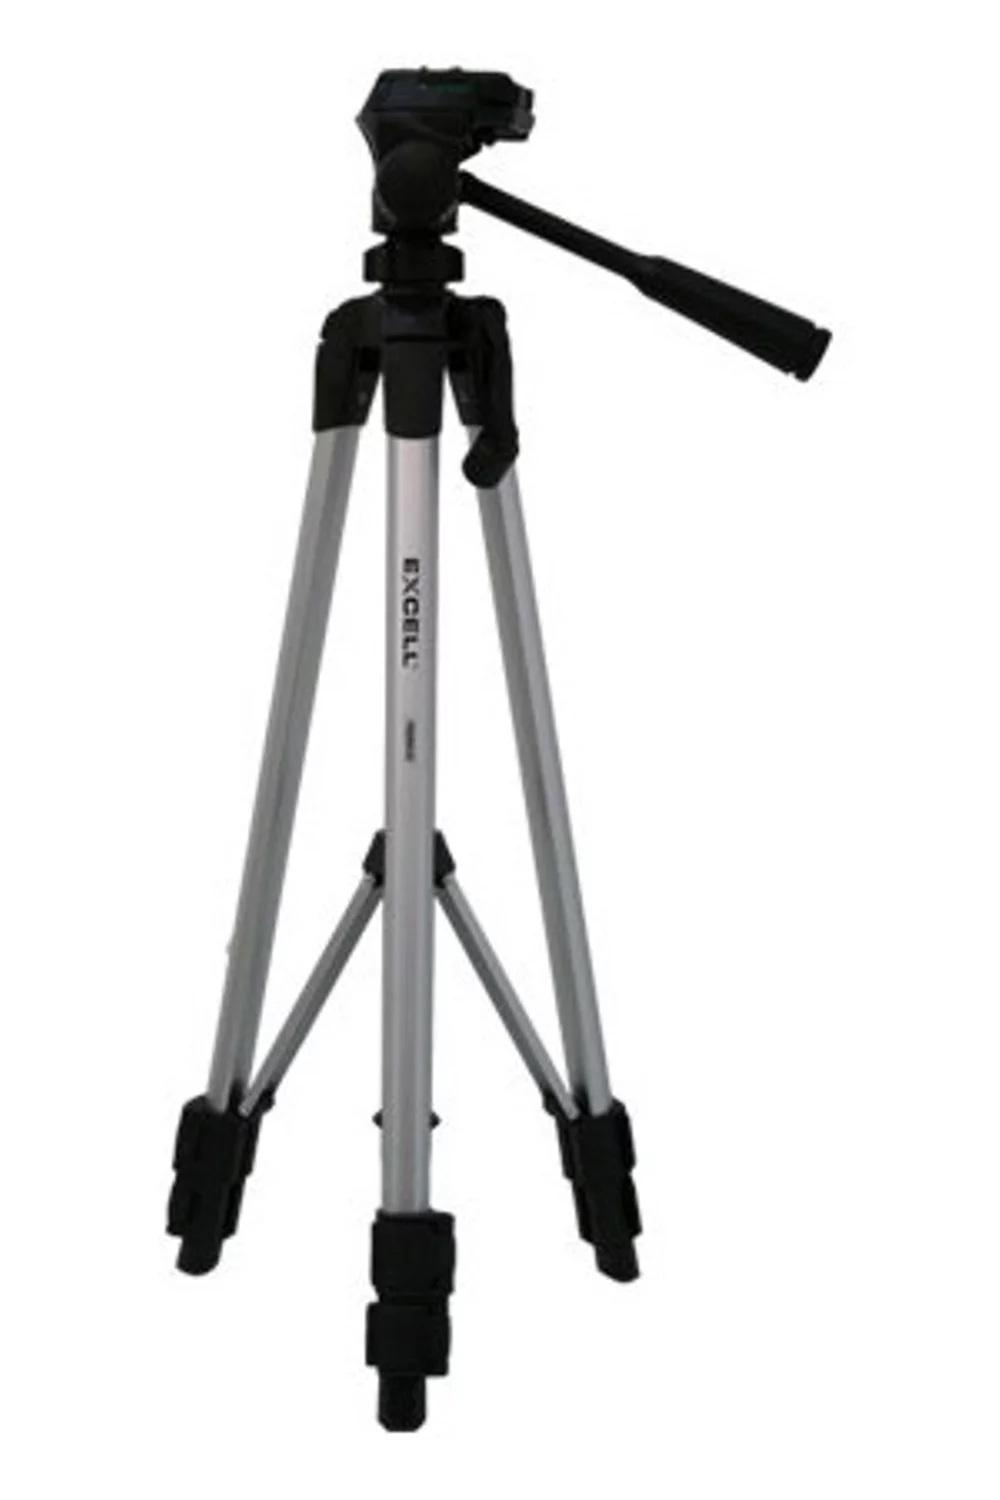 Excell Tripod Promos